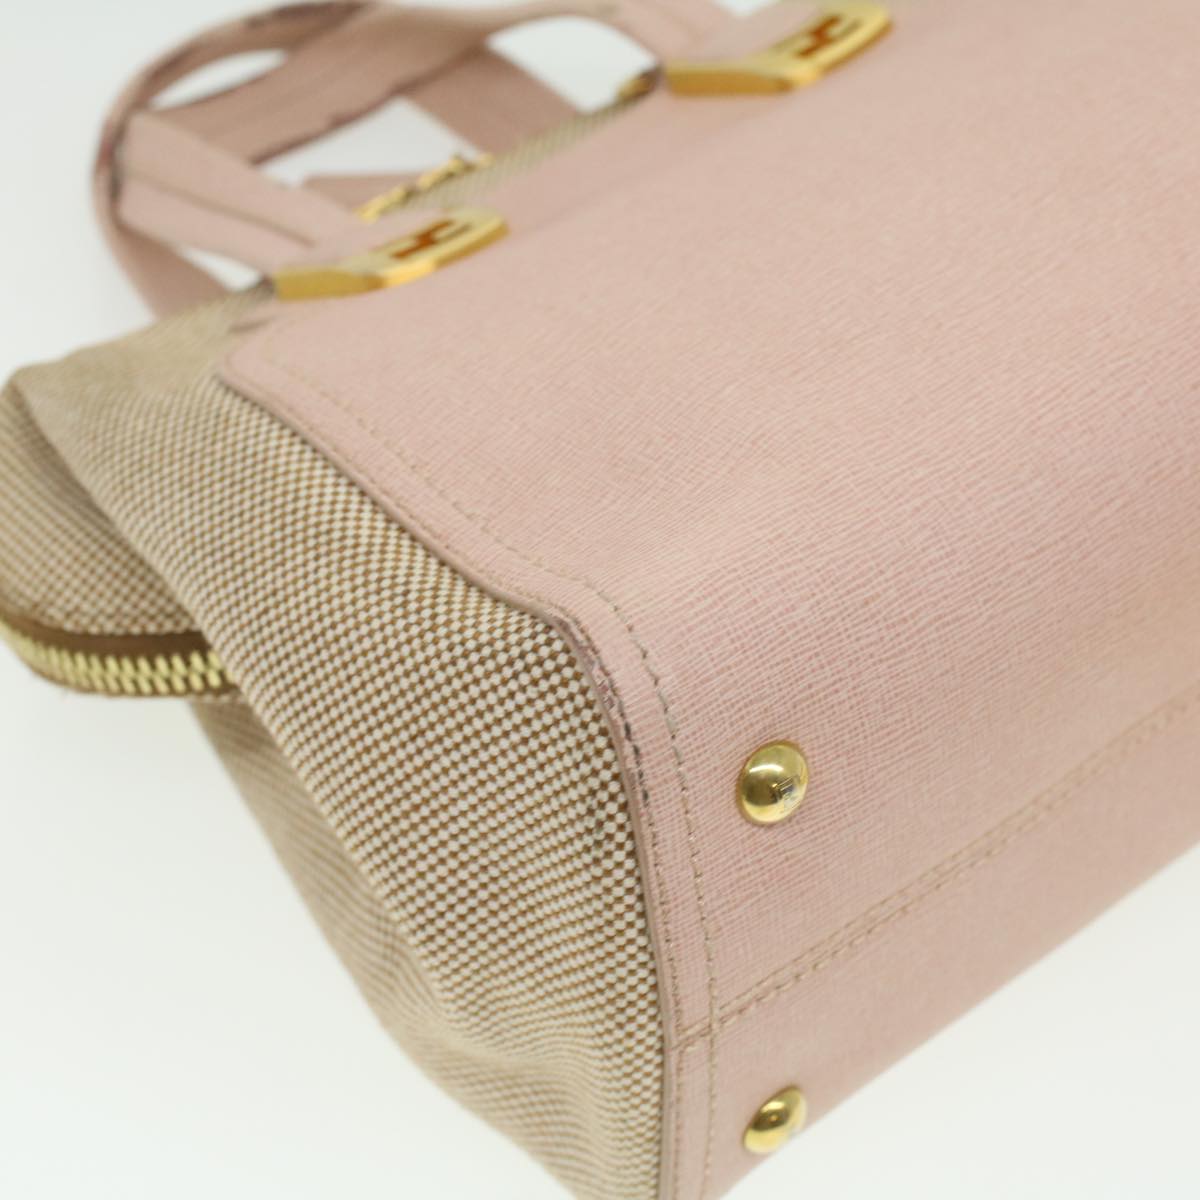 FENDI Hand Bag Leather Canvas 2way Pink Auth bs3819